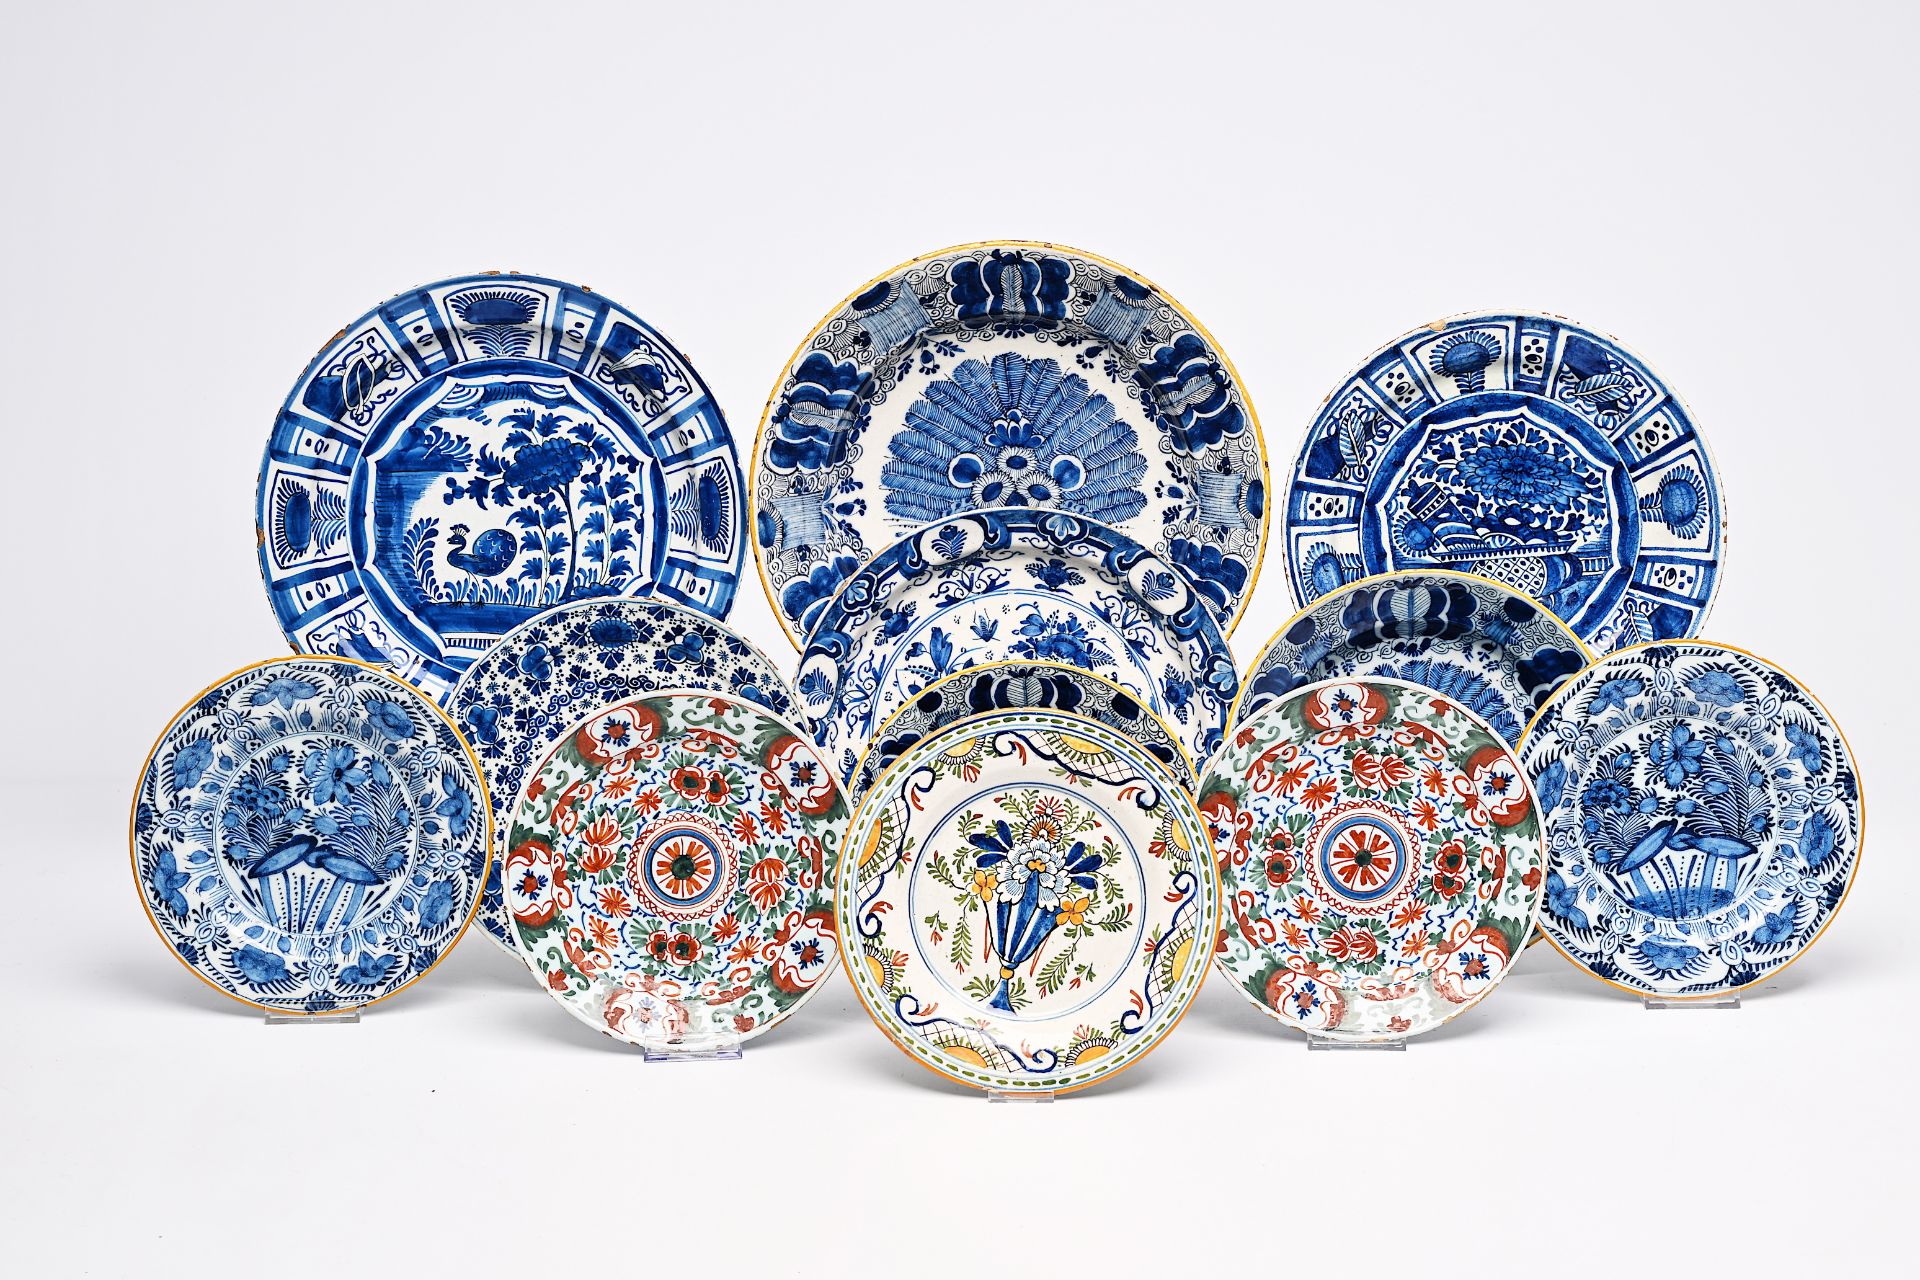 Twelve Dutch Delft blue and white and polychrome plates and dishes, 18th C.